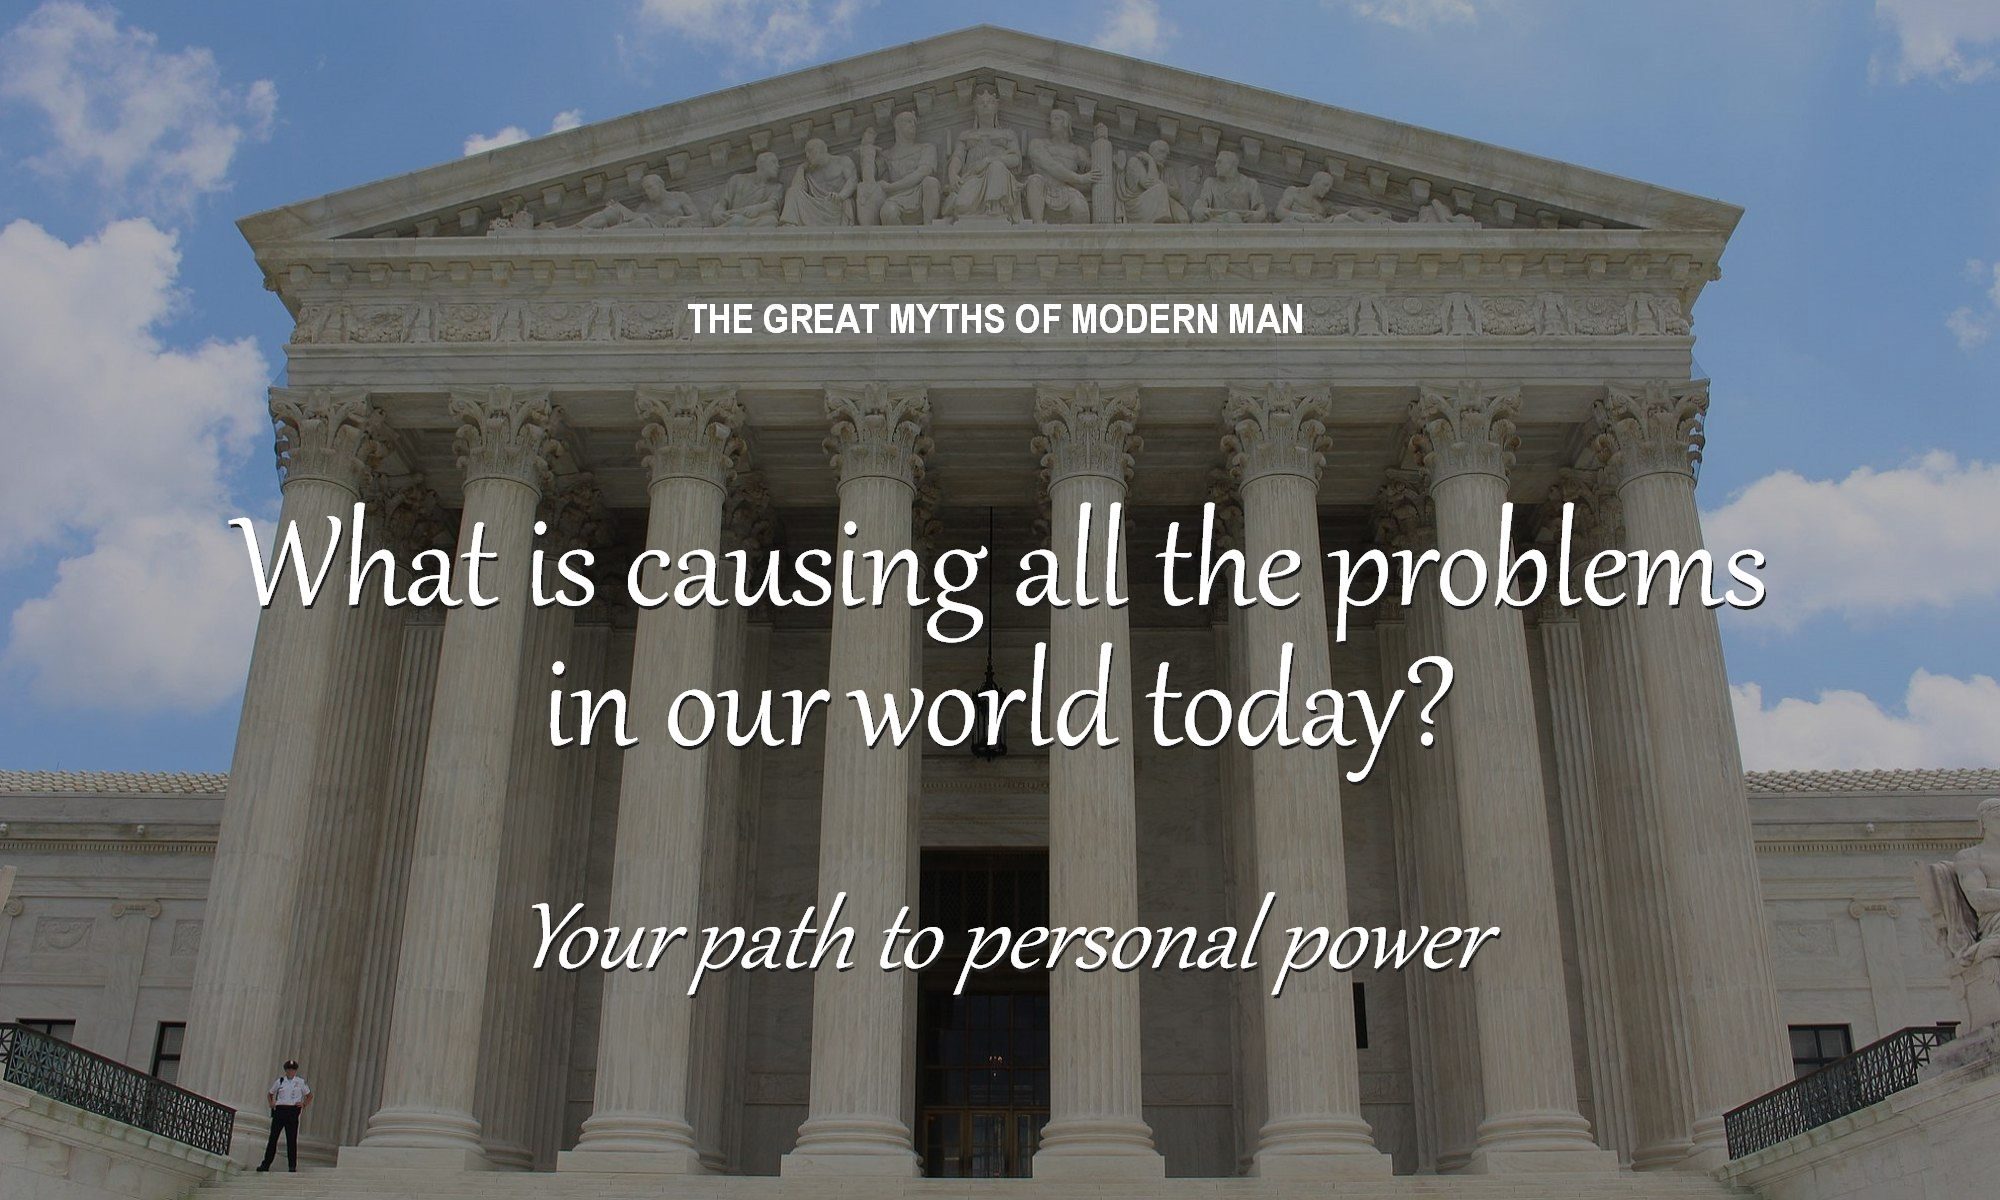 What is causing all the problems in our world today? Your path to personal power.